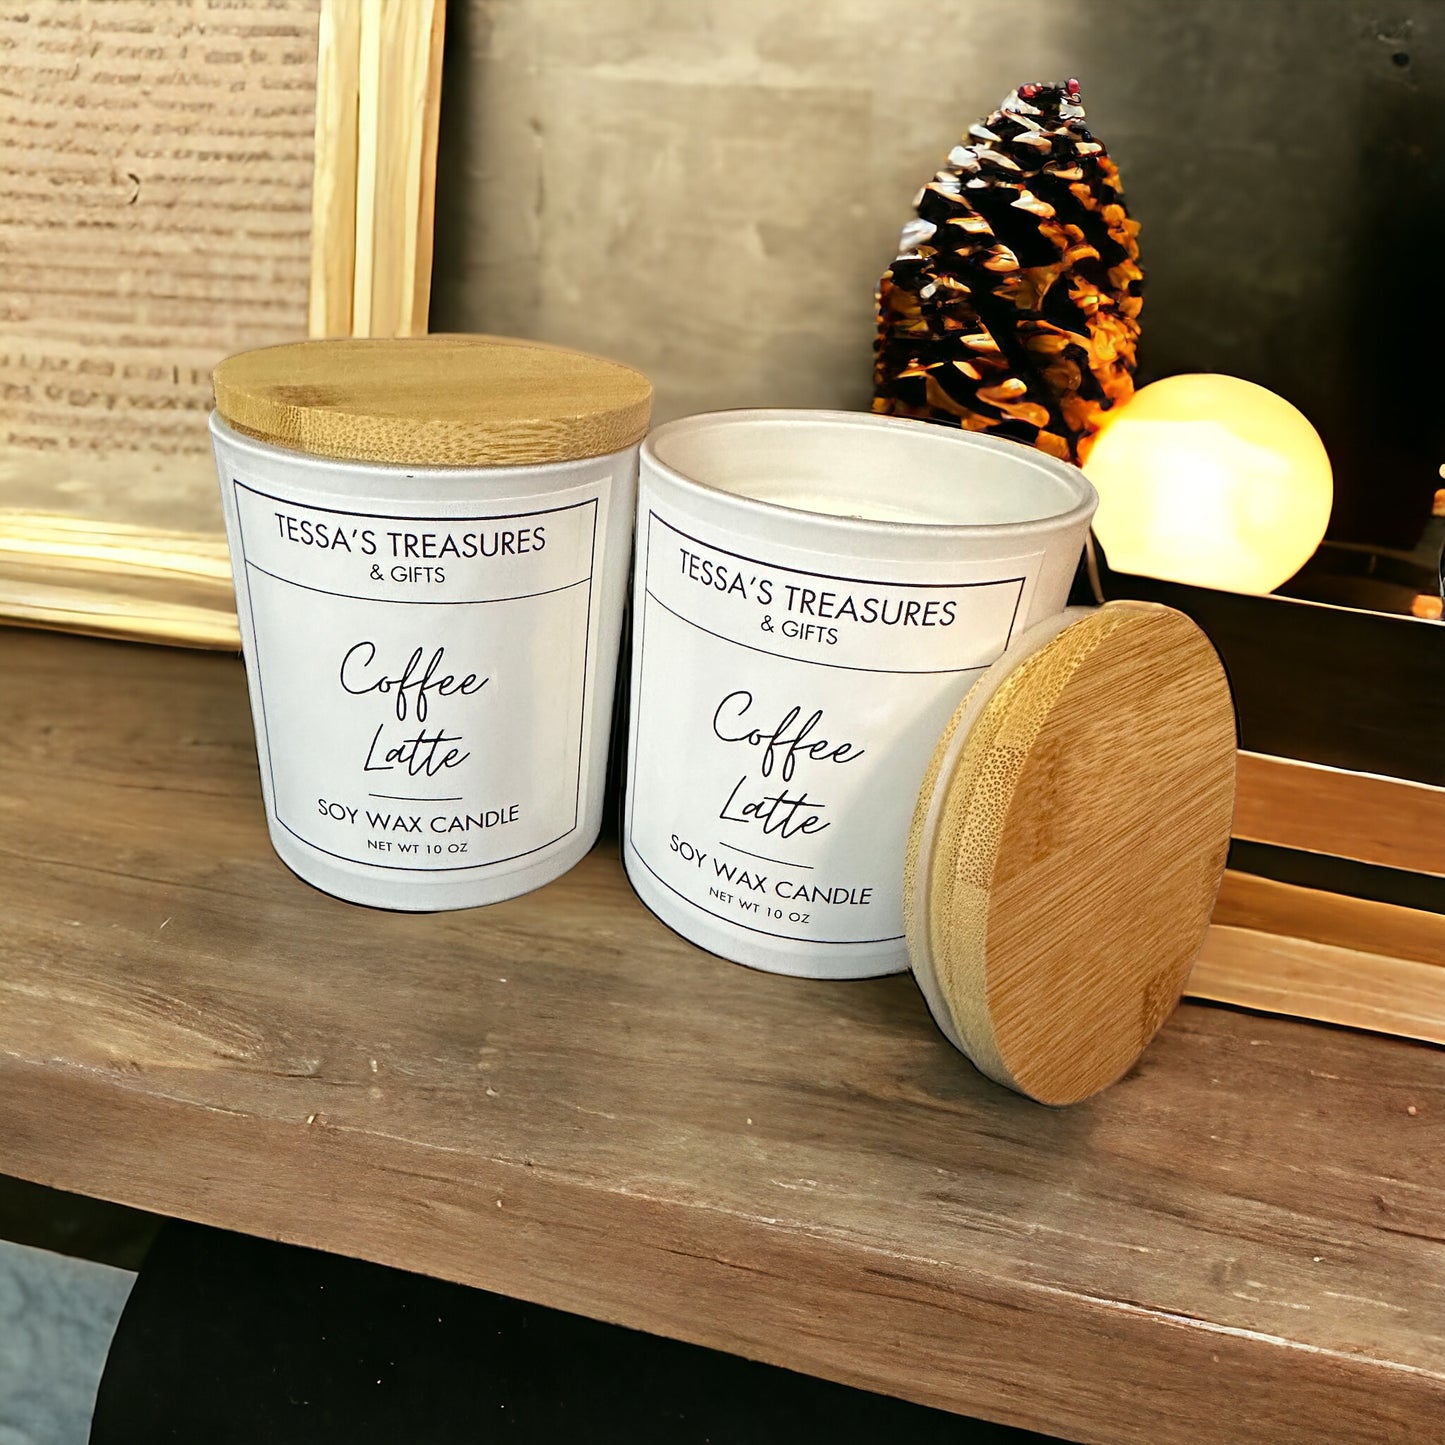 Coffee Latte candle